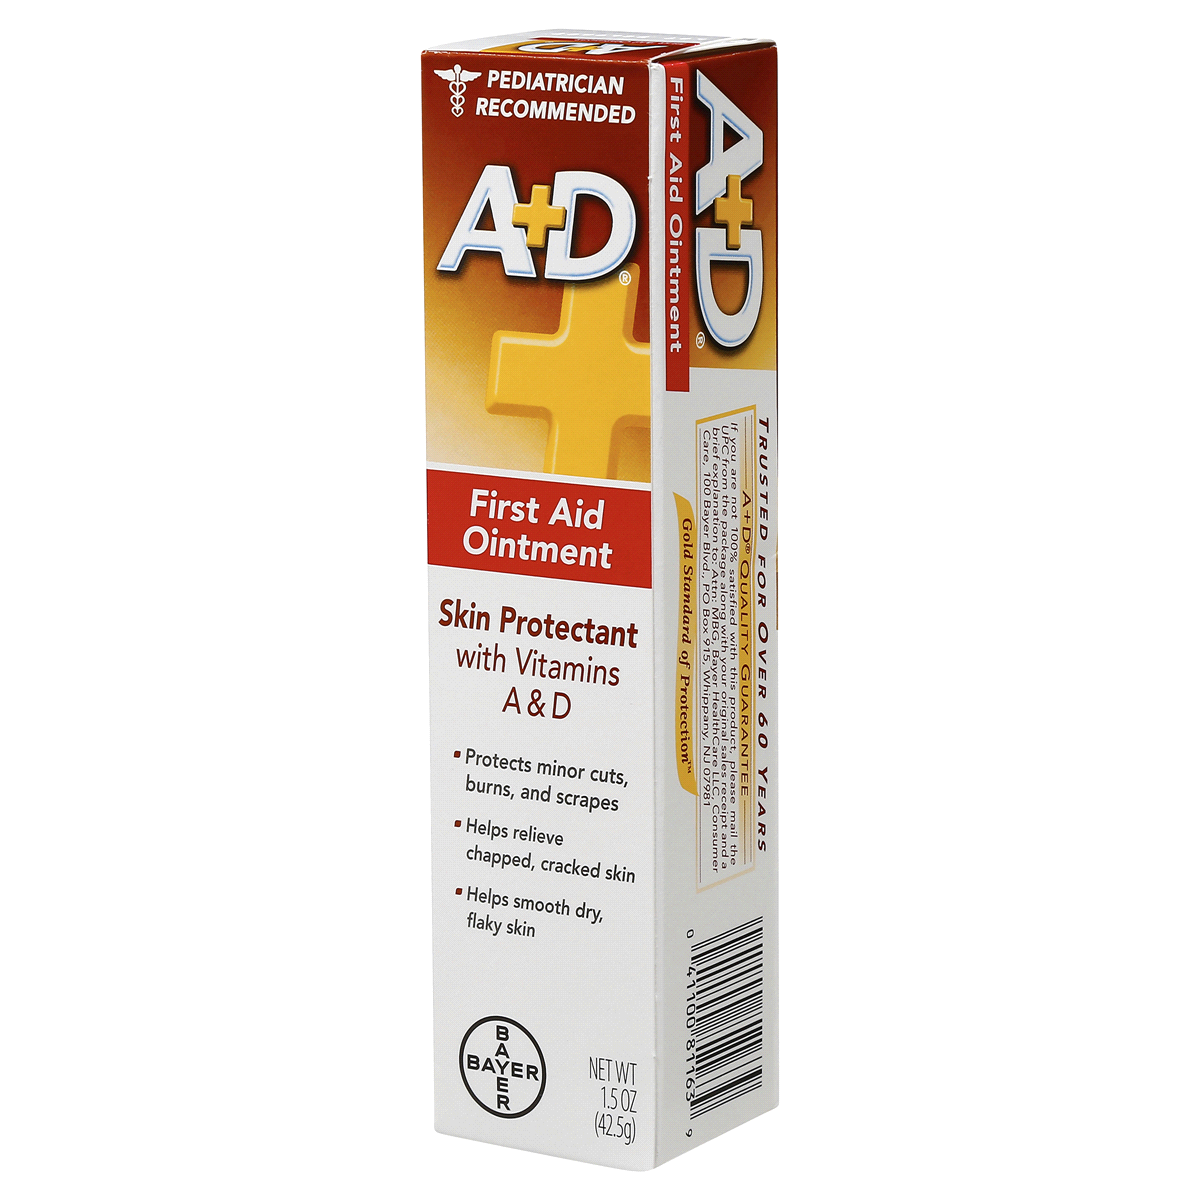 slide 8 of 10, A+D Multipurpose First Aid Ointment 1.5 oz Box, 1.5 oz